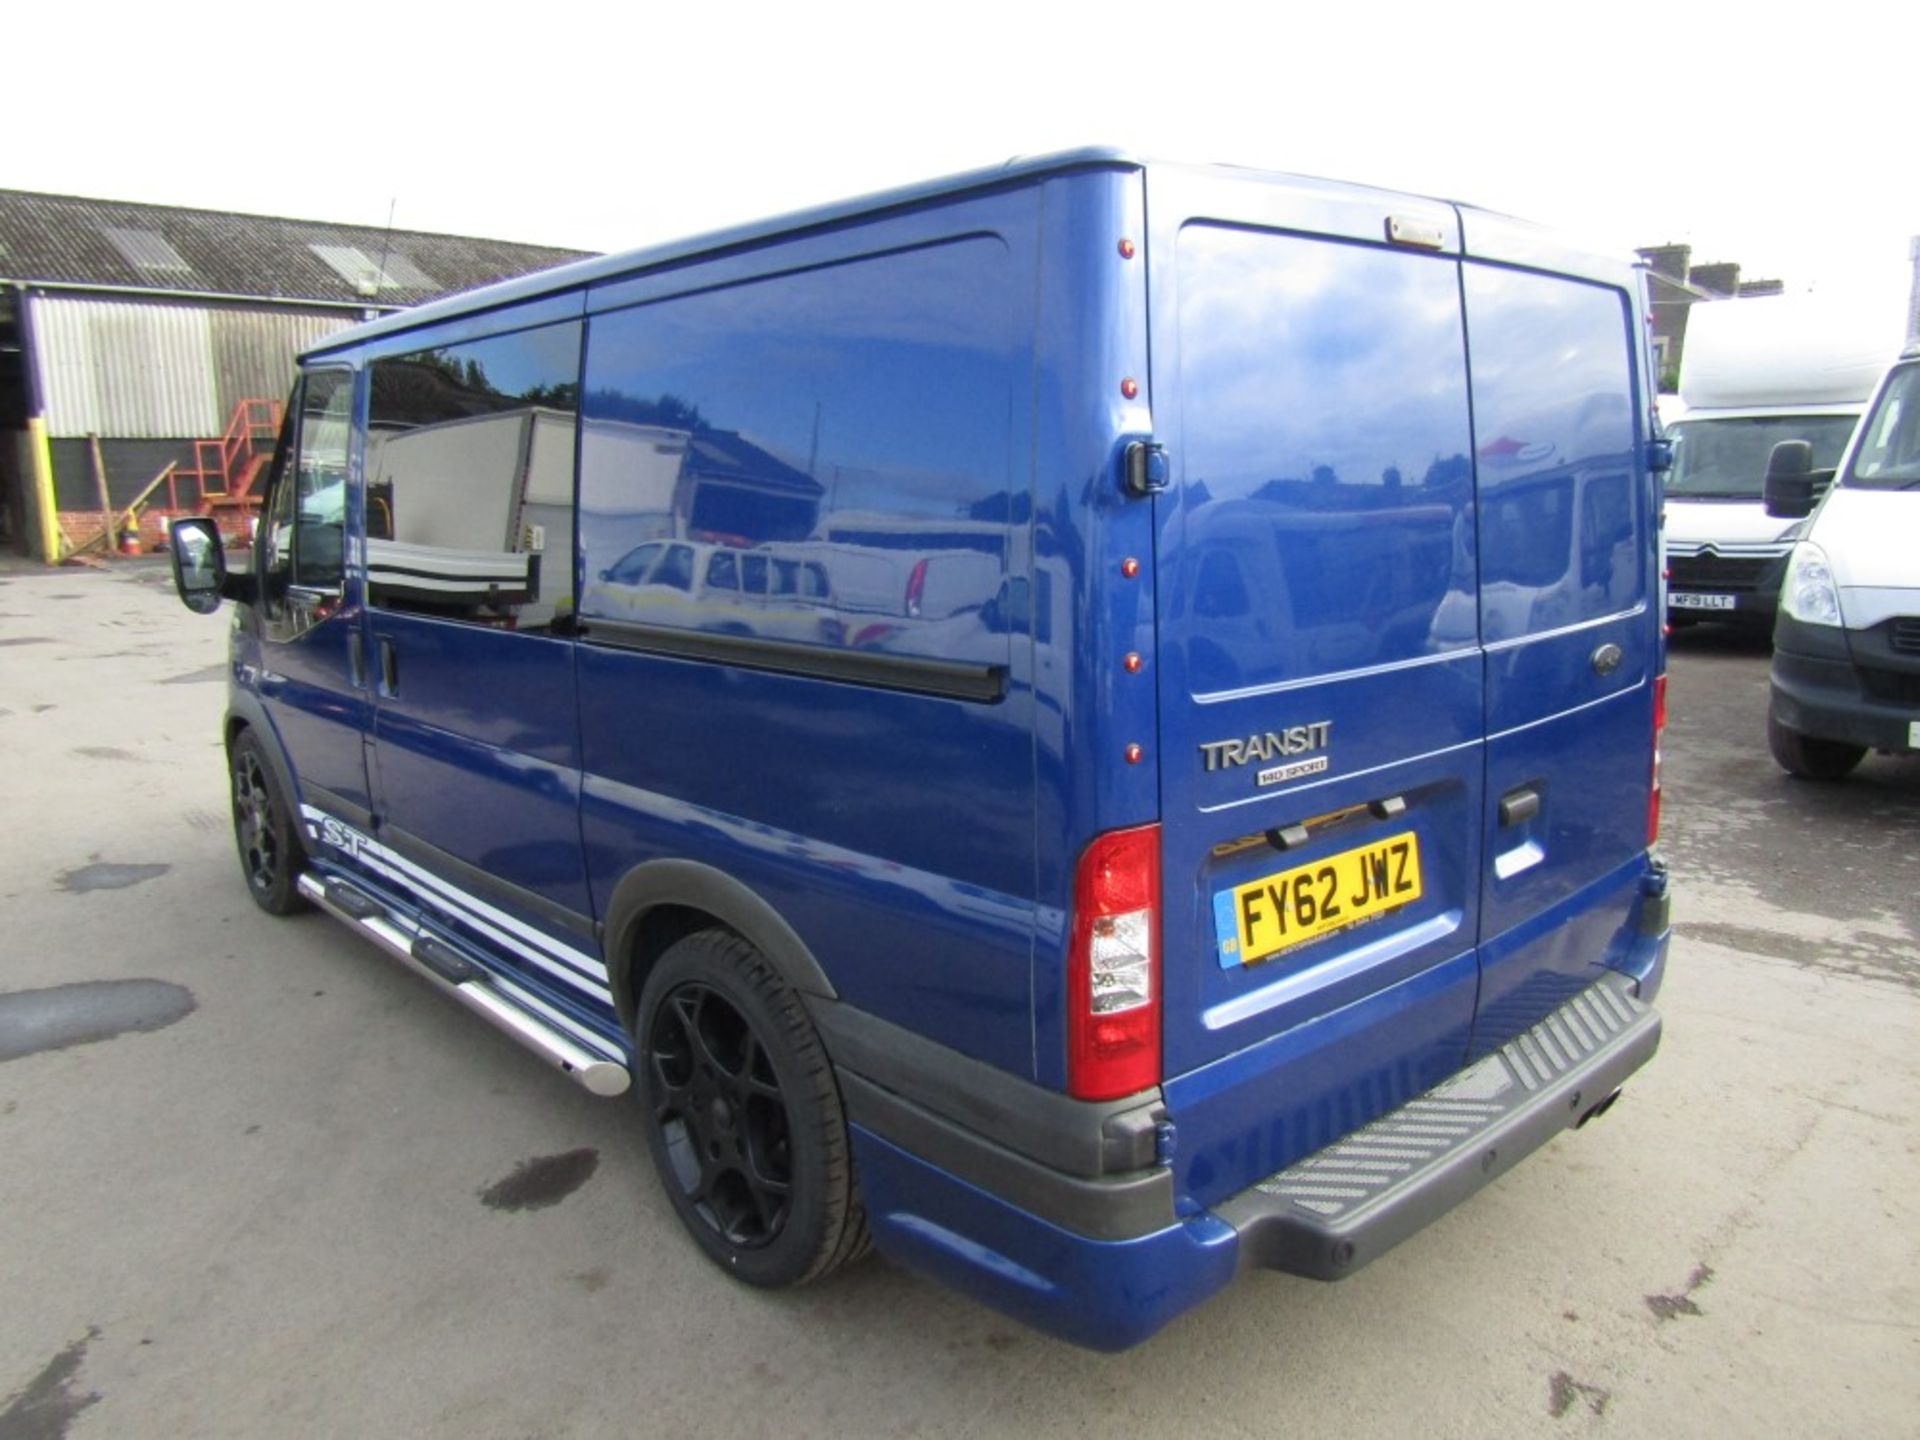 62 reg FORD TRANSIT 140 BHP SPORT, 1ST REG 09/12, 87285M WARRANTED, V5 HERE, 6 FORMER KEEPERS [NO - Image 3 of 8